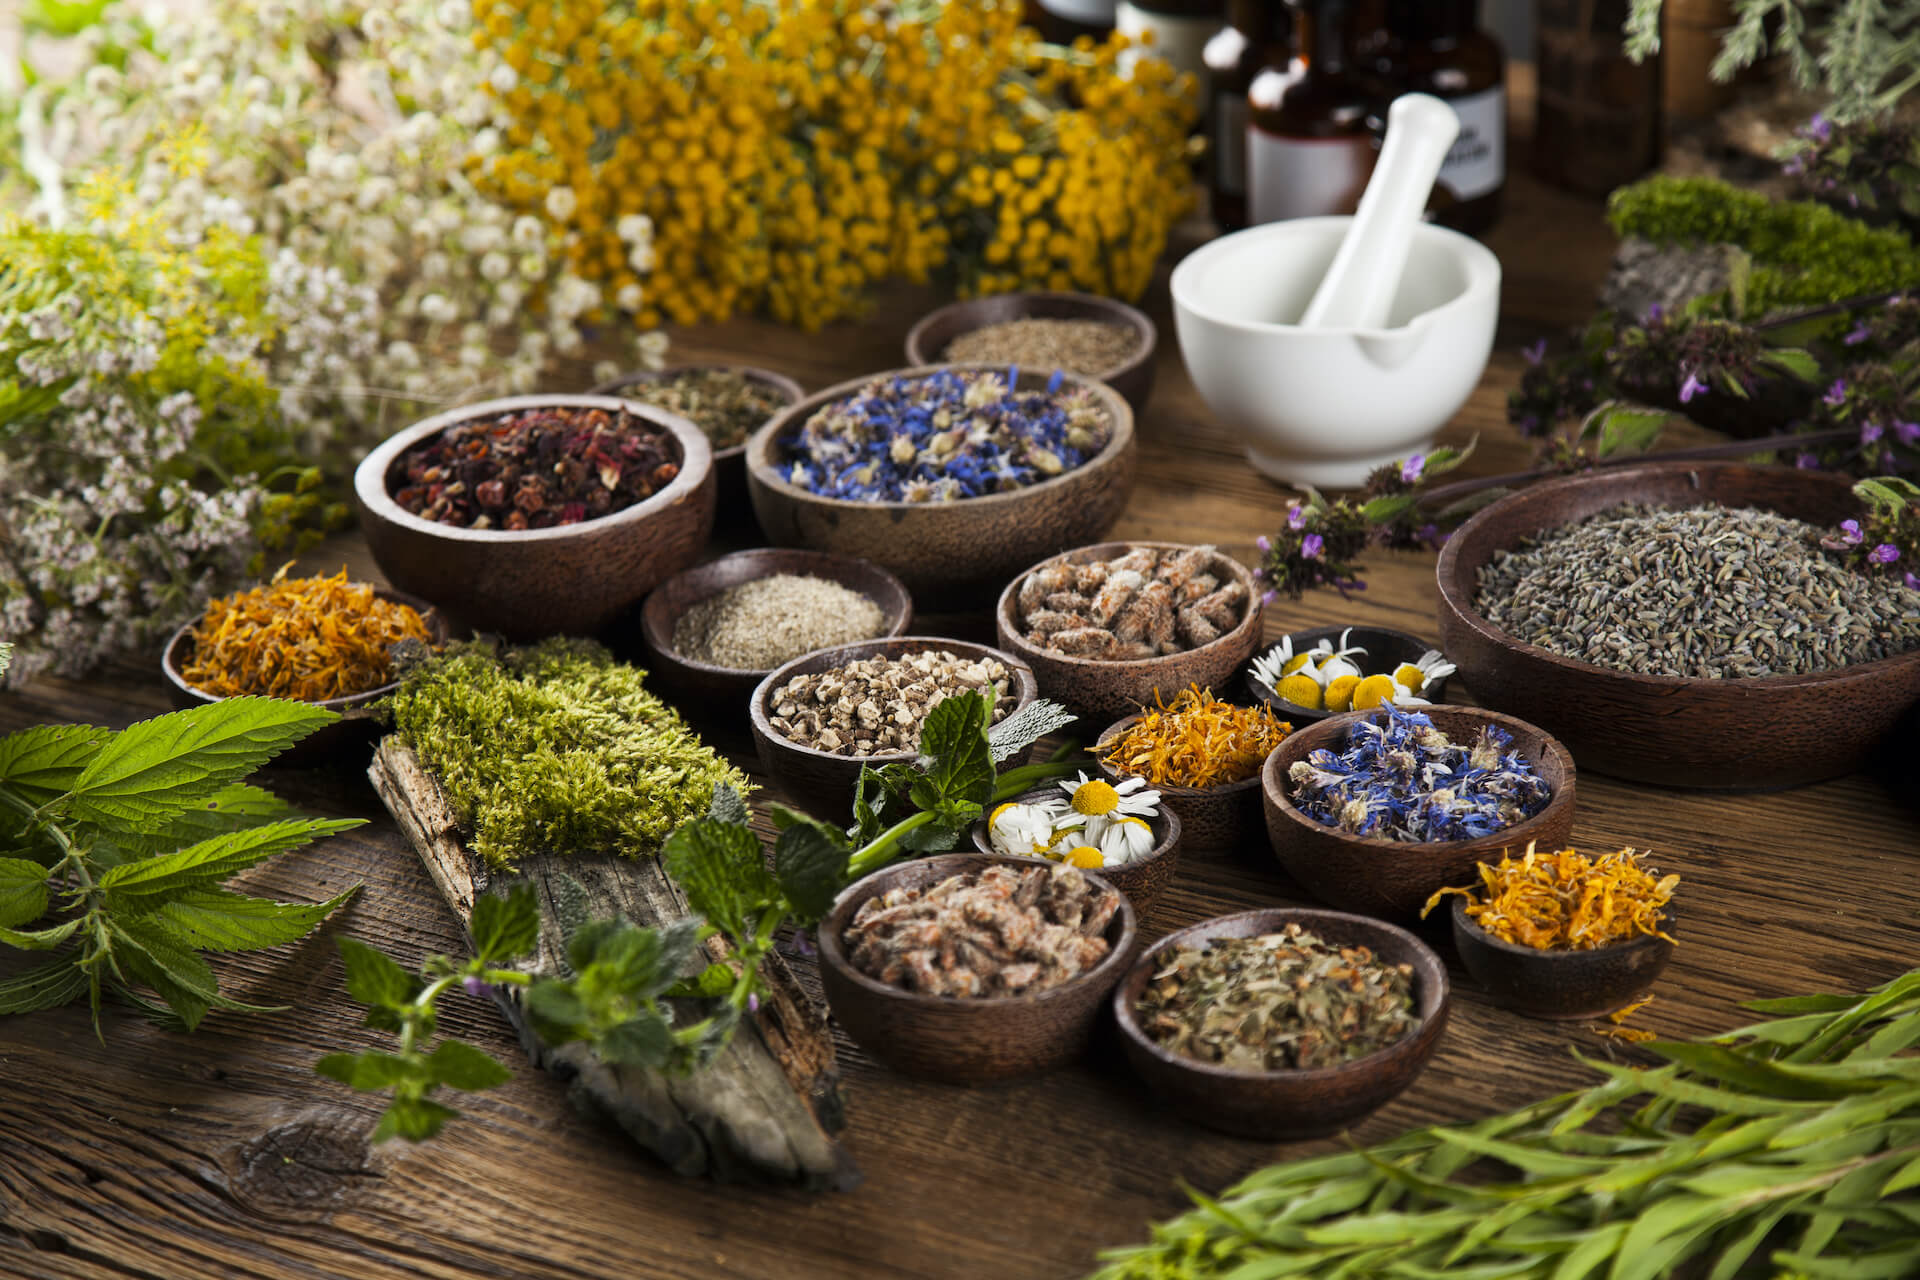 Traditional Medicine and Nevada Law- The Balance Between Tradition and Regulation